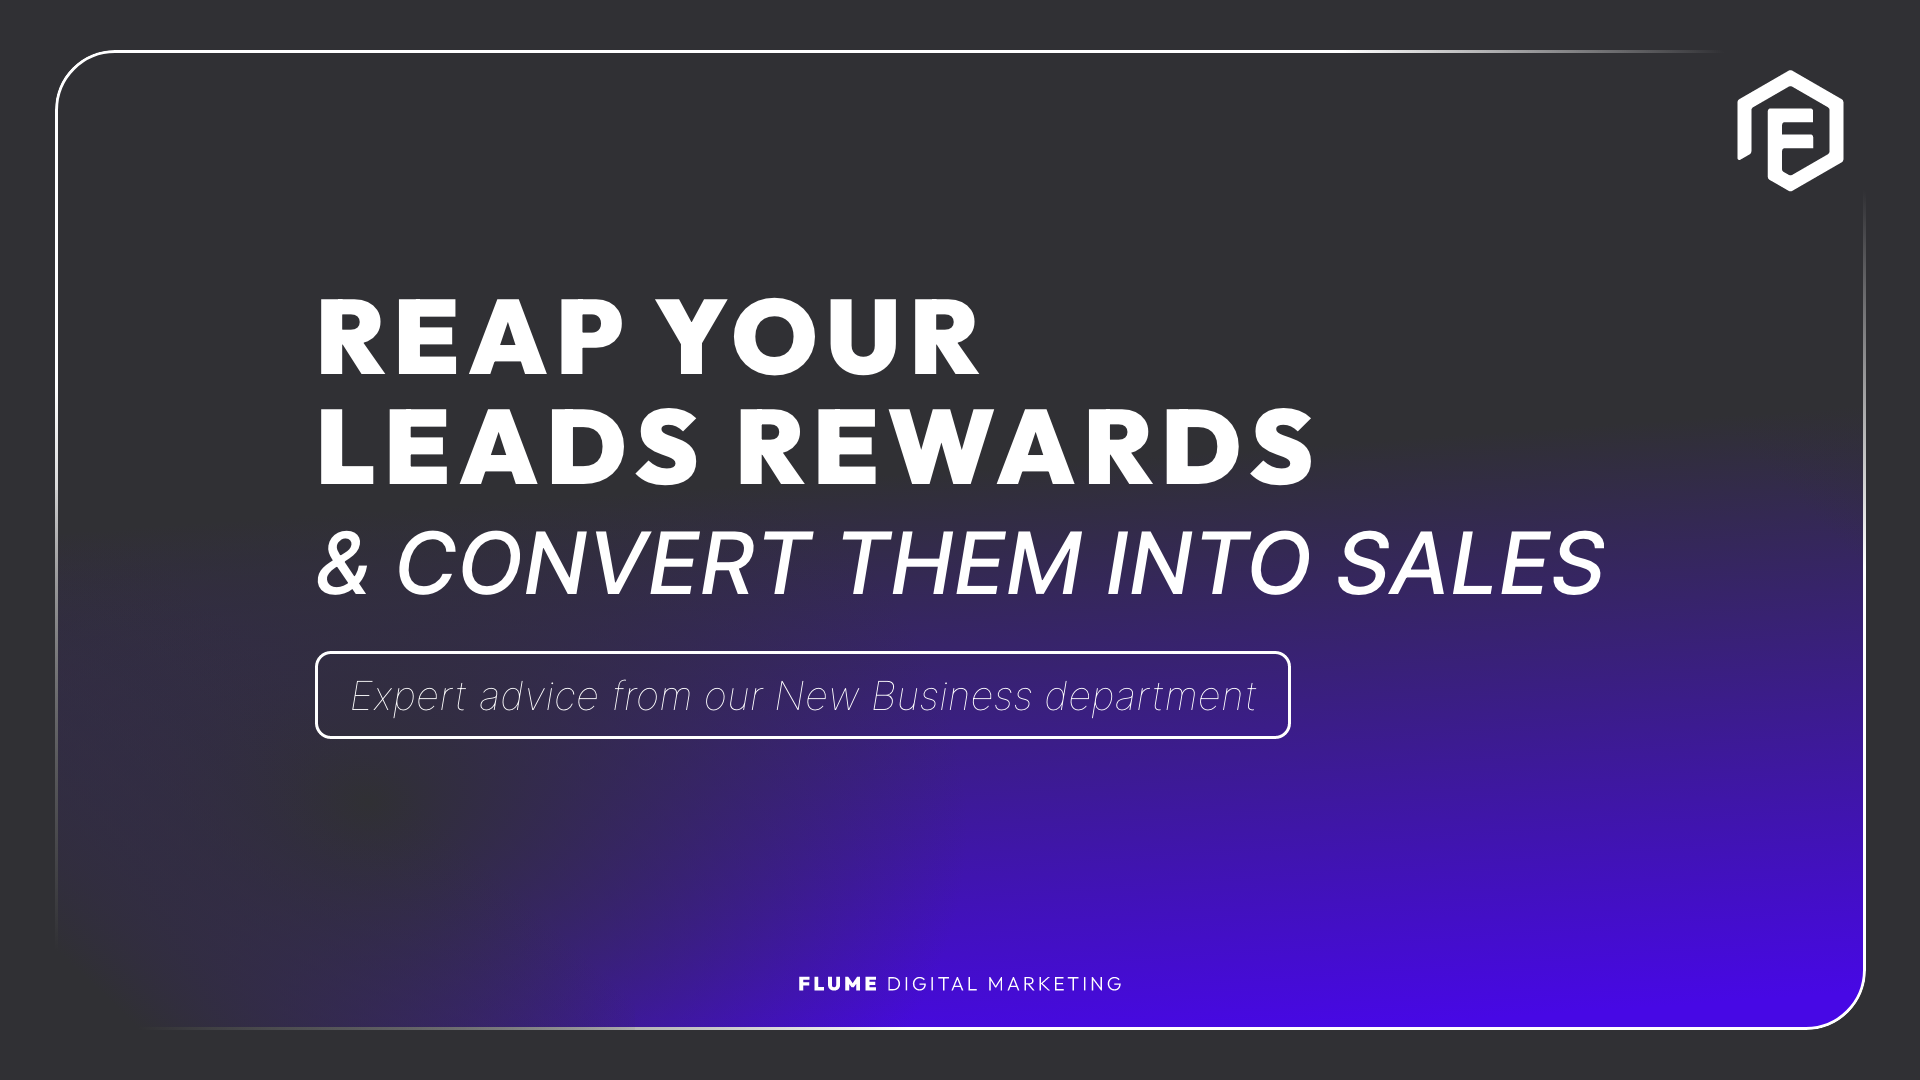 Leads and how to convert them into sales